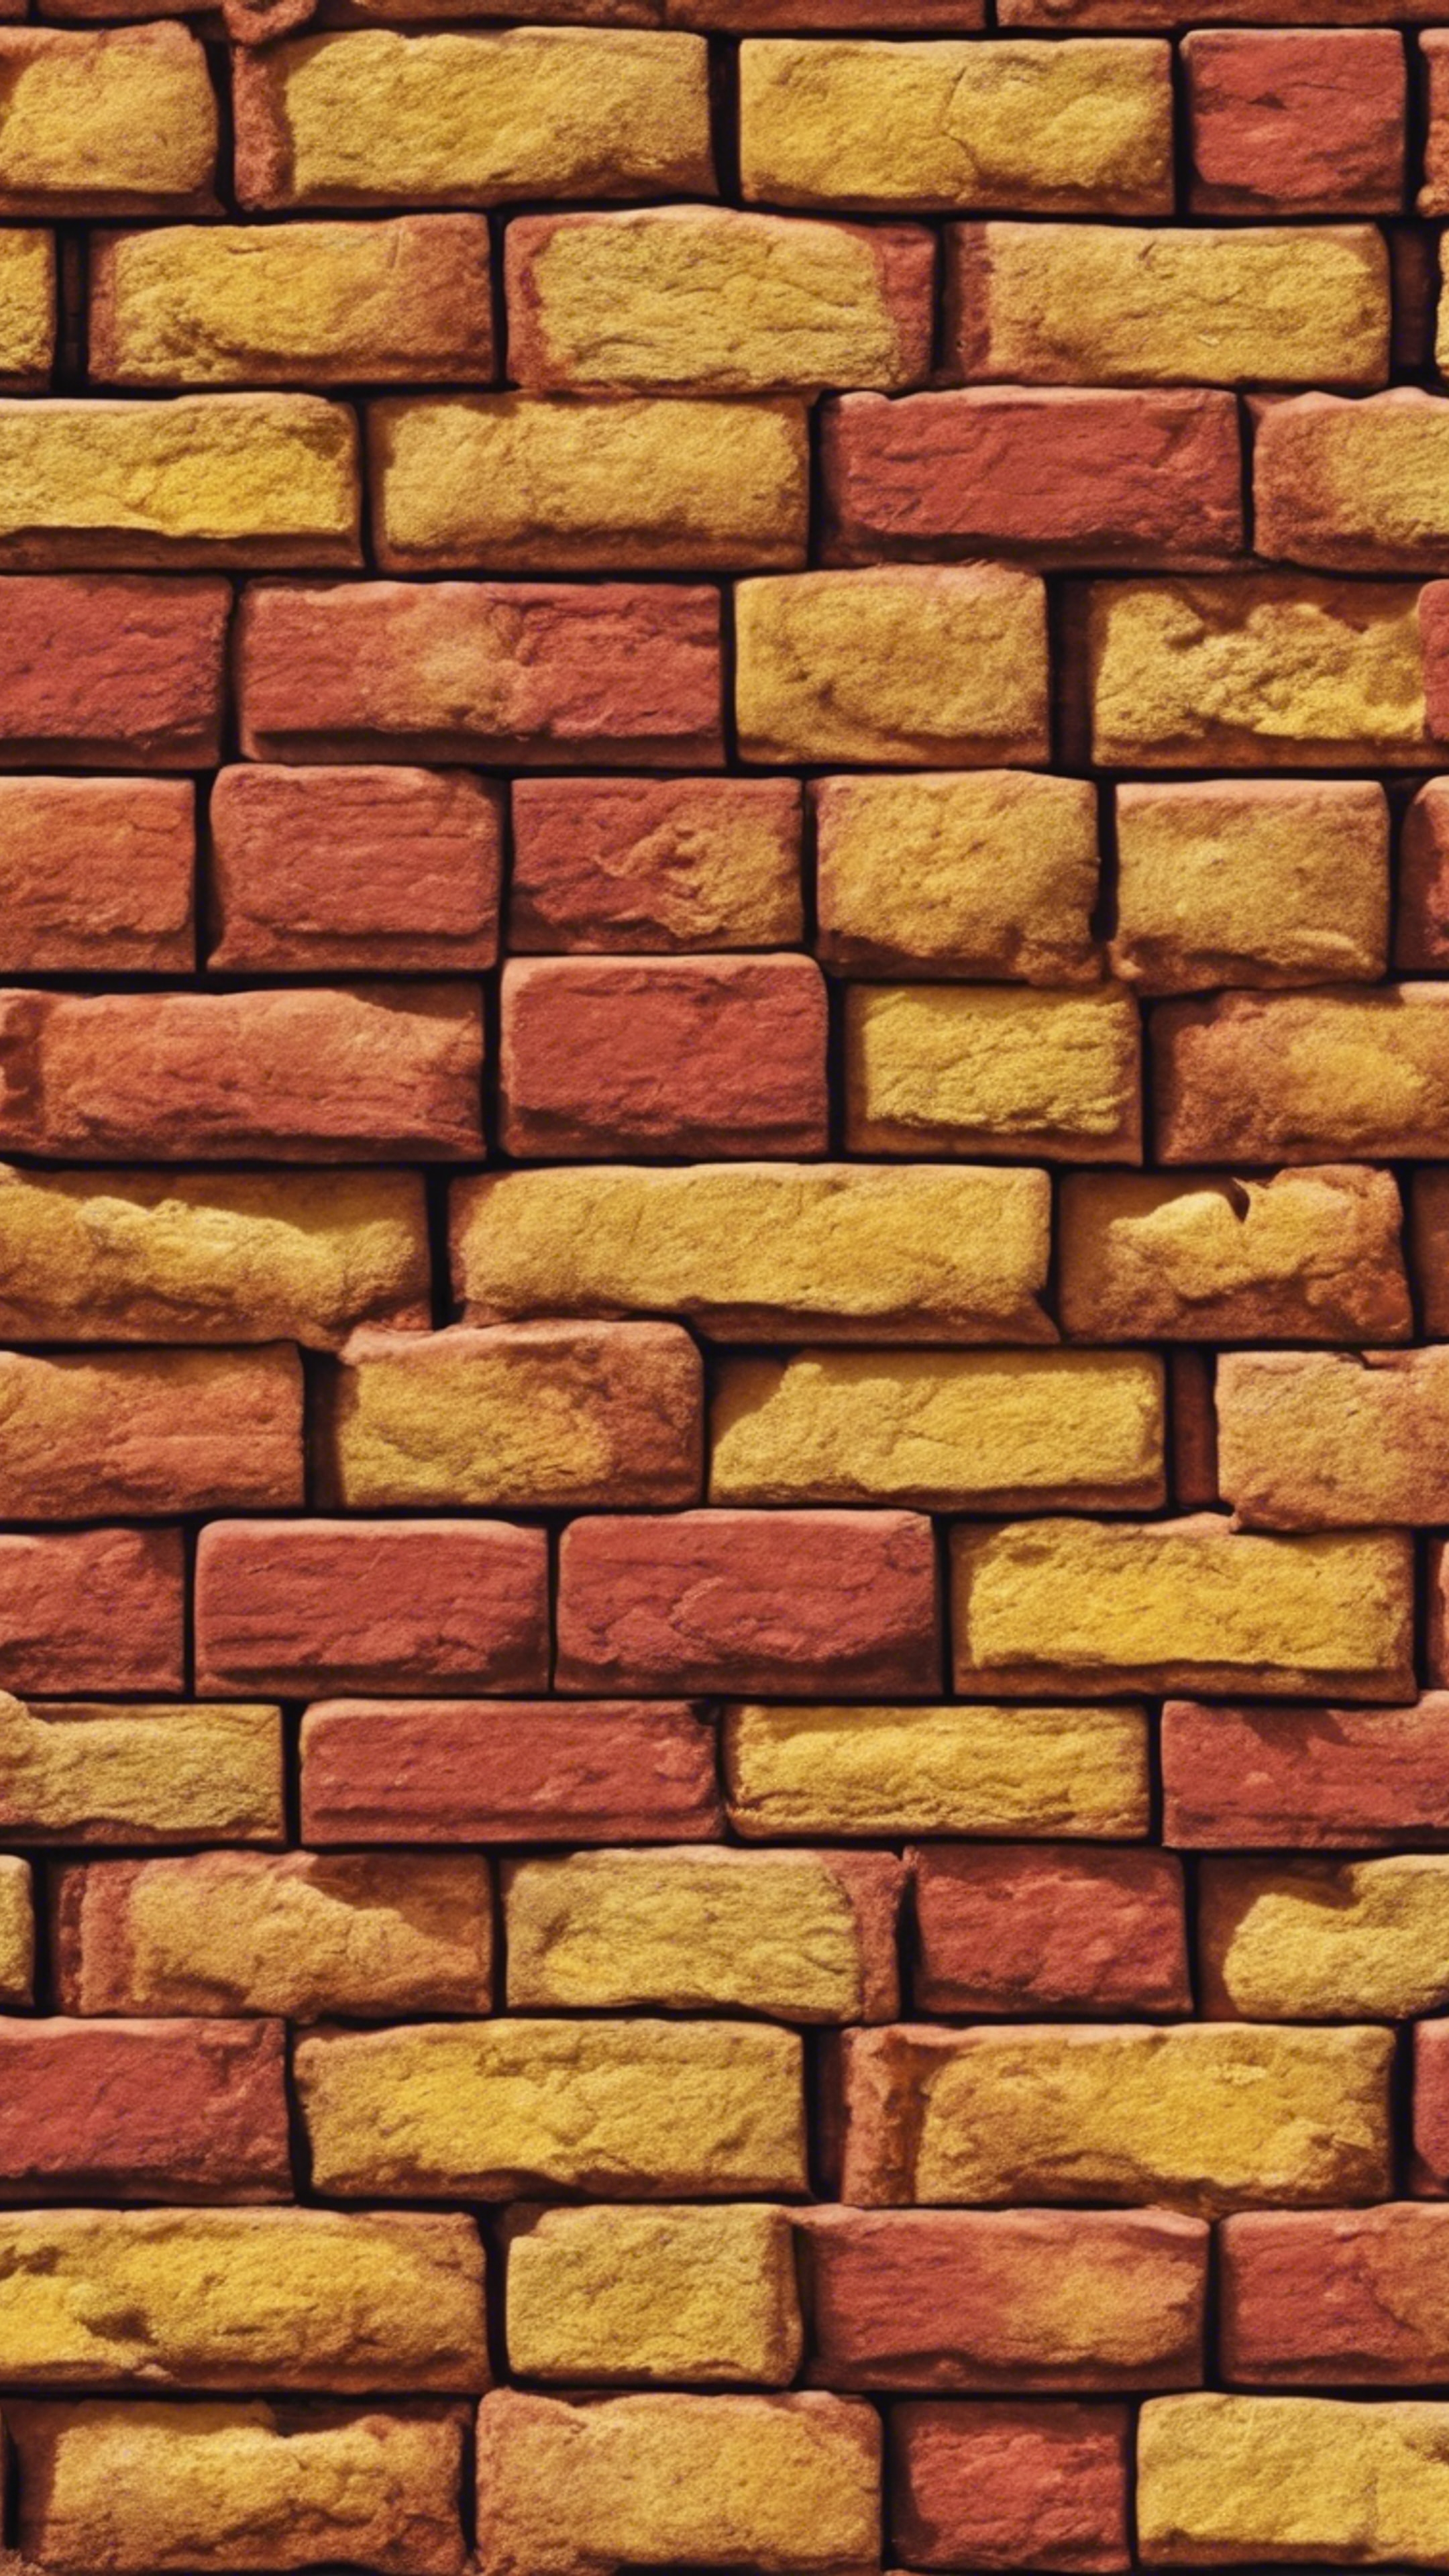 A wall made of red and yellow bricks fitted together in a seamless pattern.壁紙[bcaa90a422a24f4f849c]